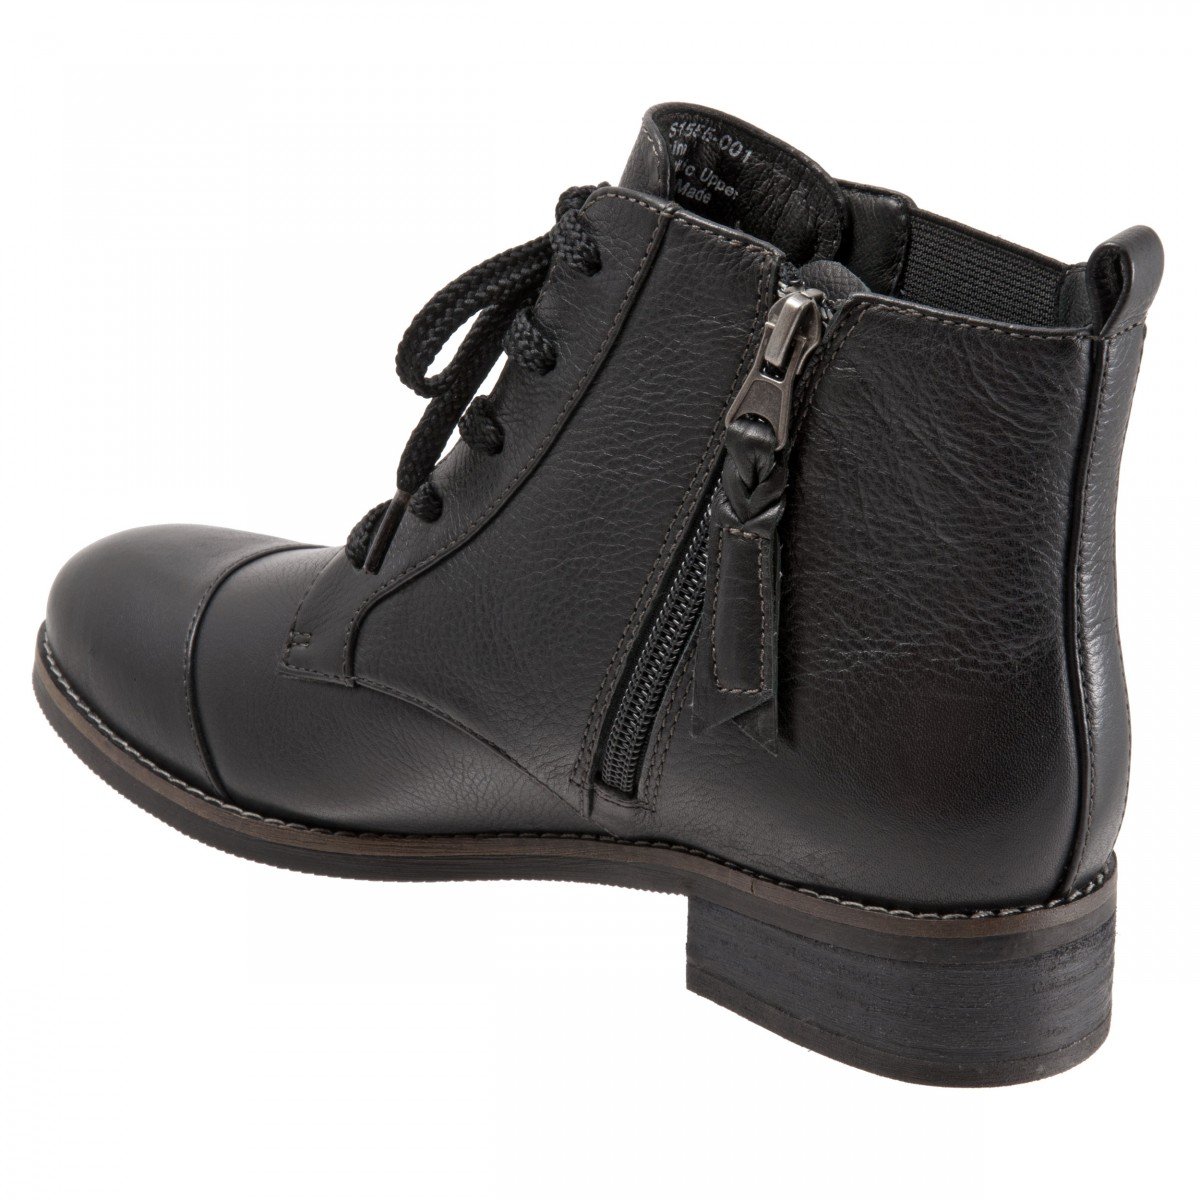 Softwalk Miller - Women's Ankle Boots - Free Shipping